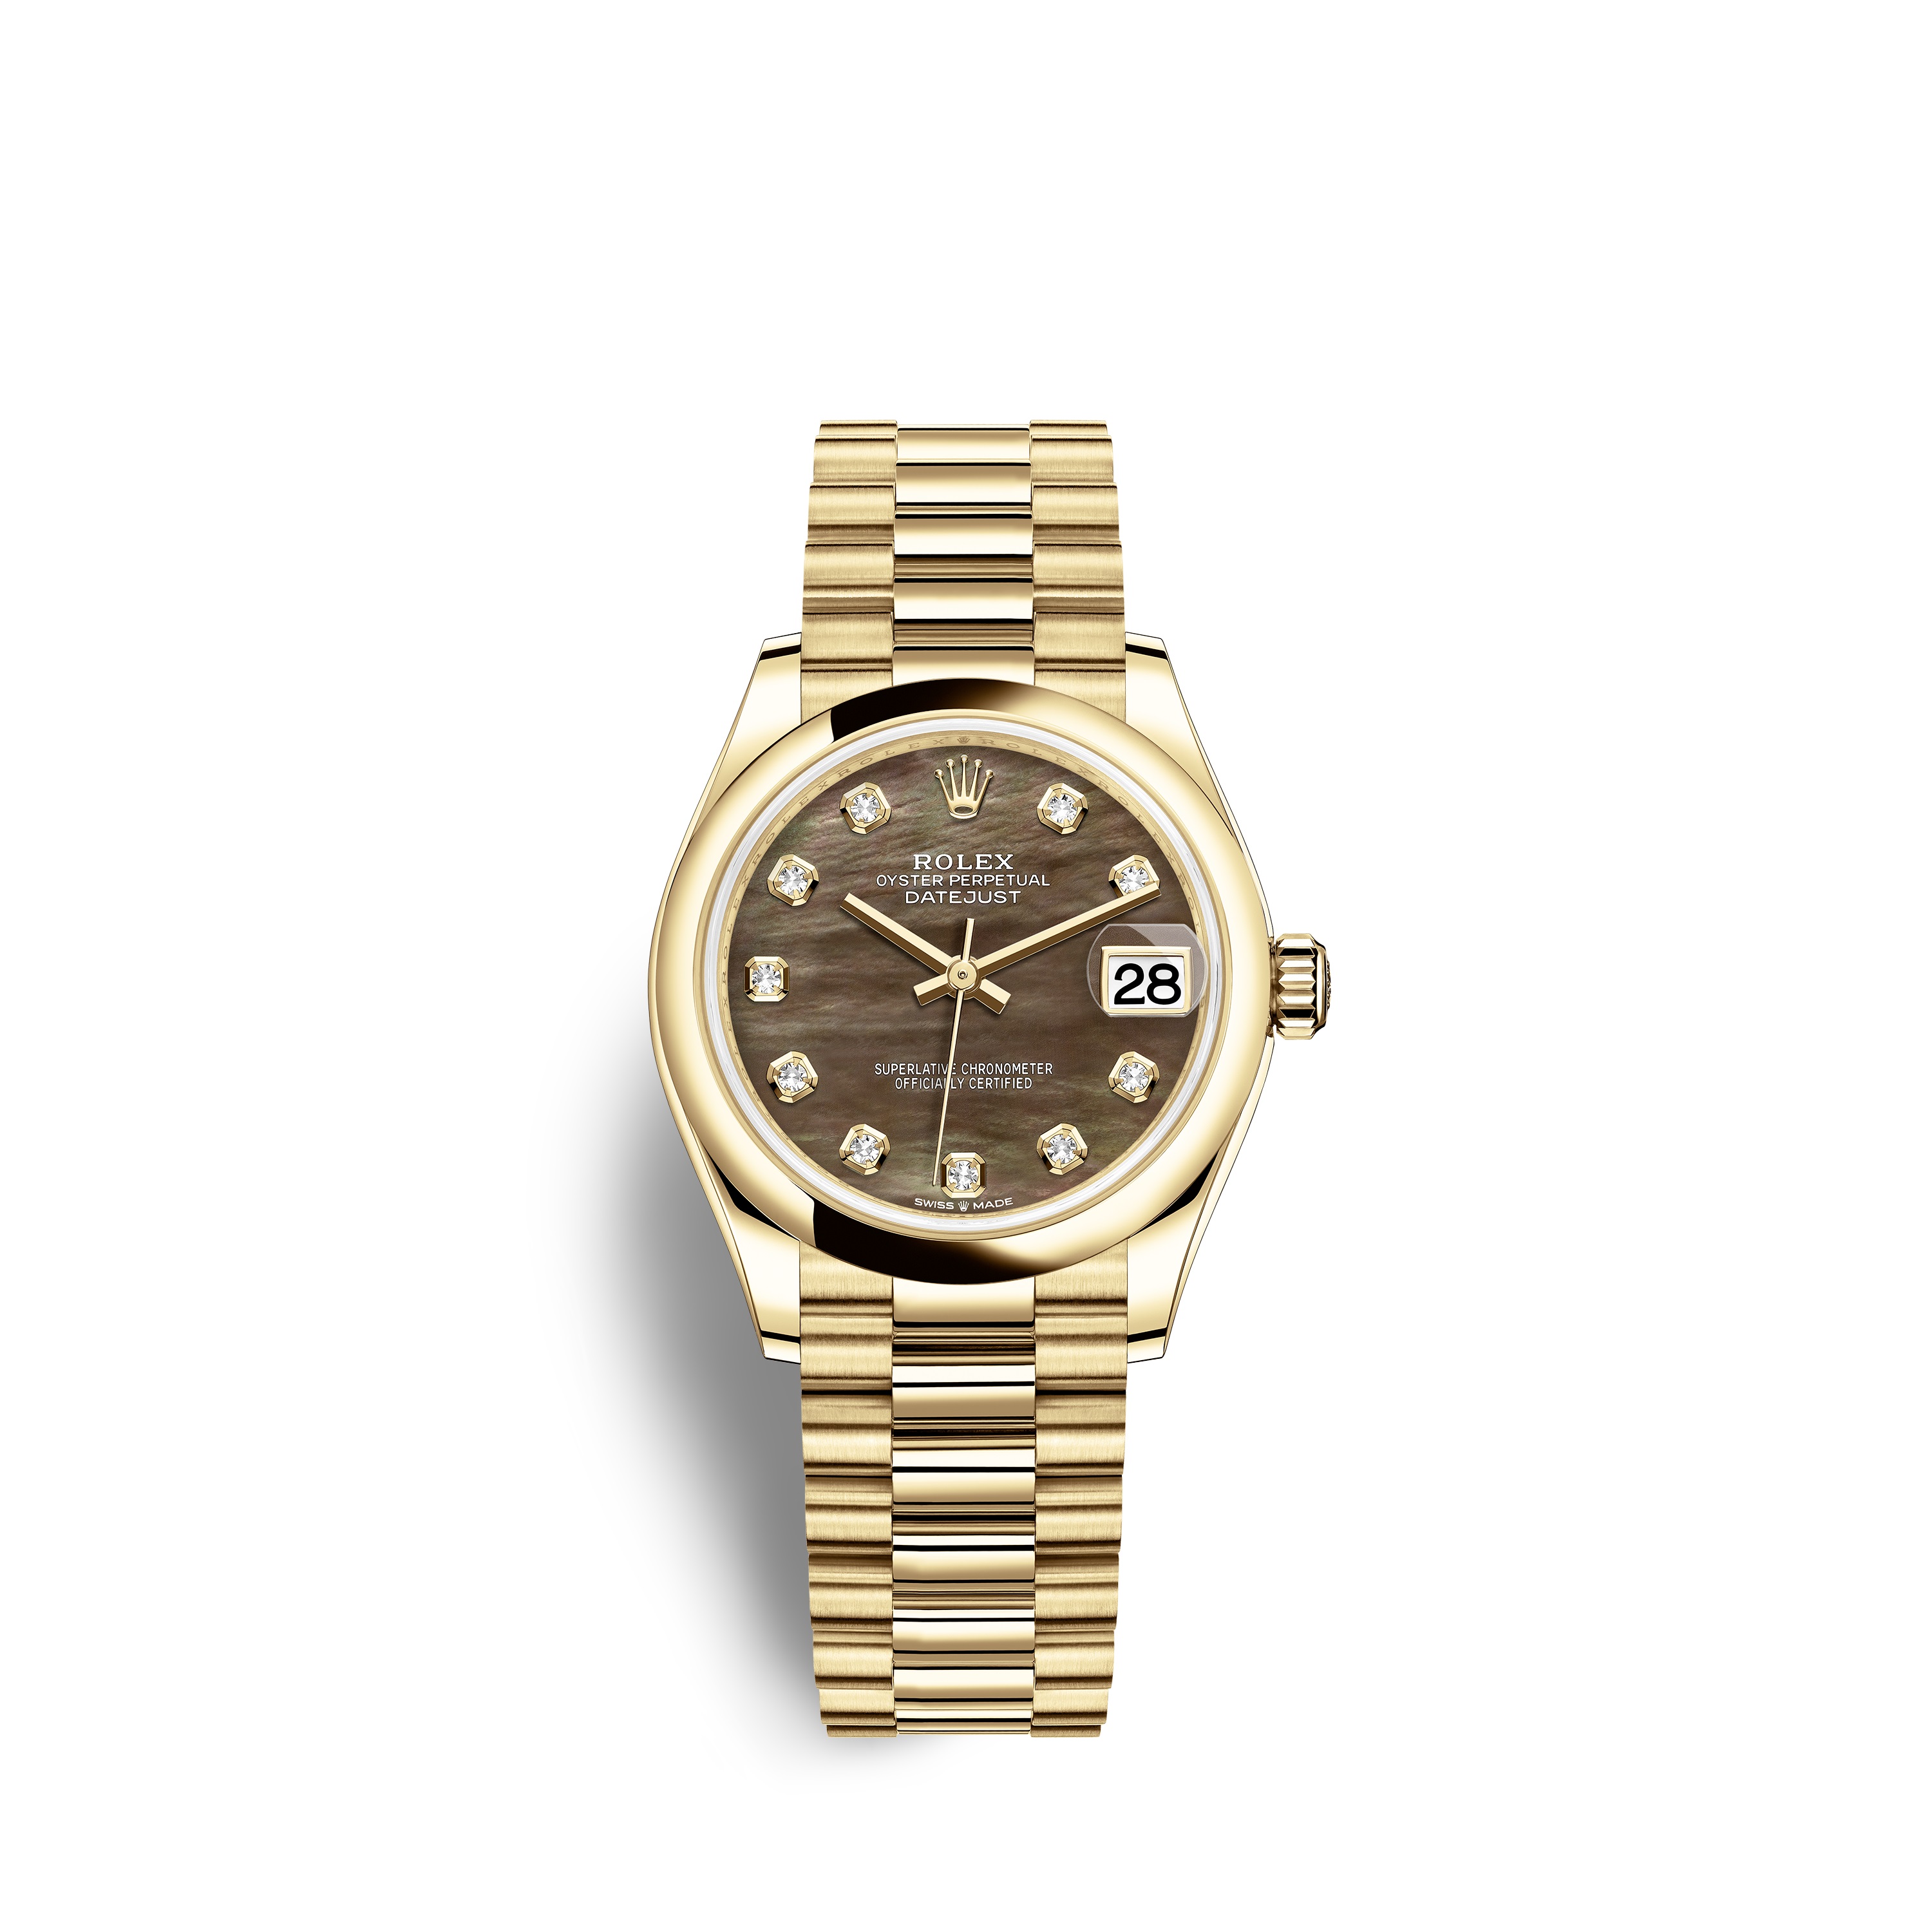 Datejust 31 278248 Gold Watch (Black Mother-of-Pearl Set with Diamonds)